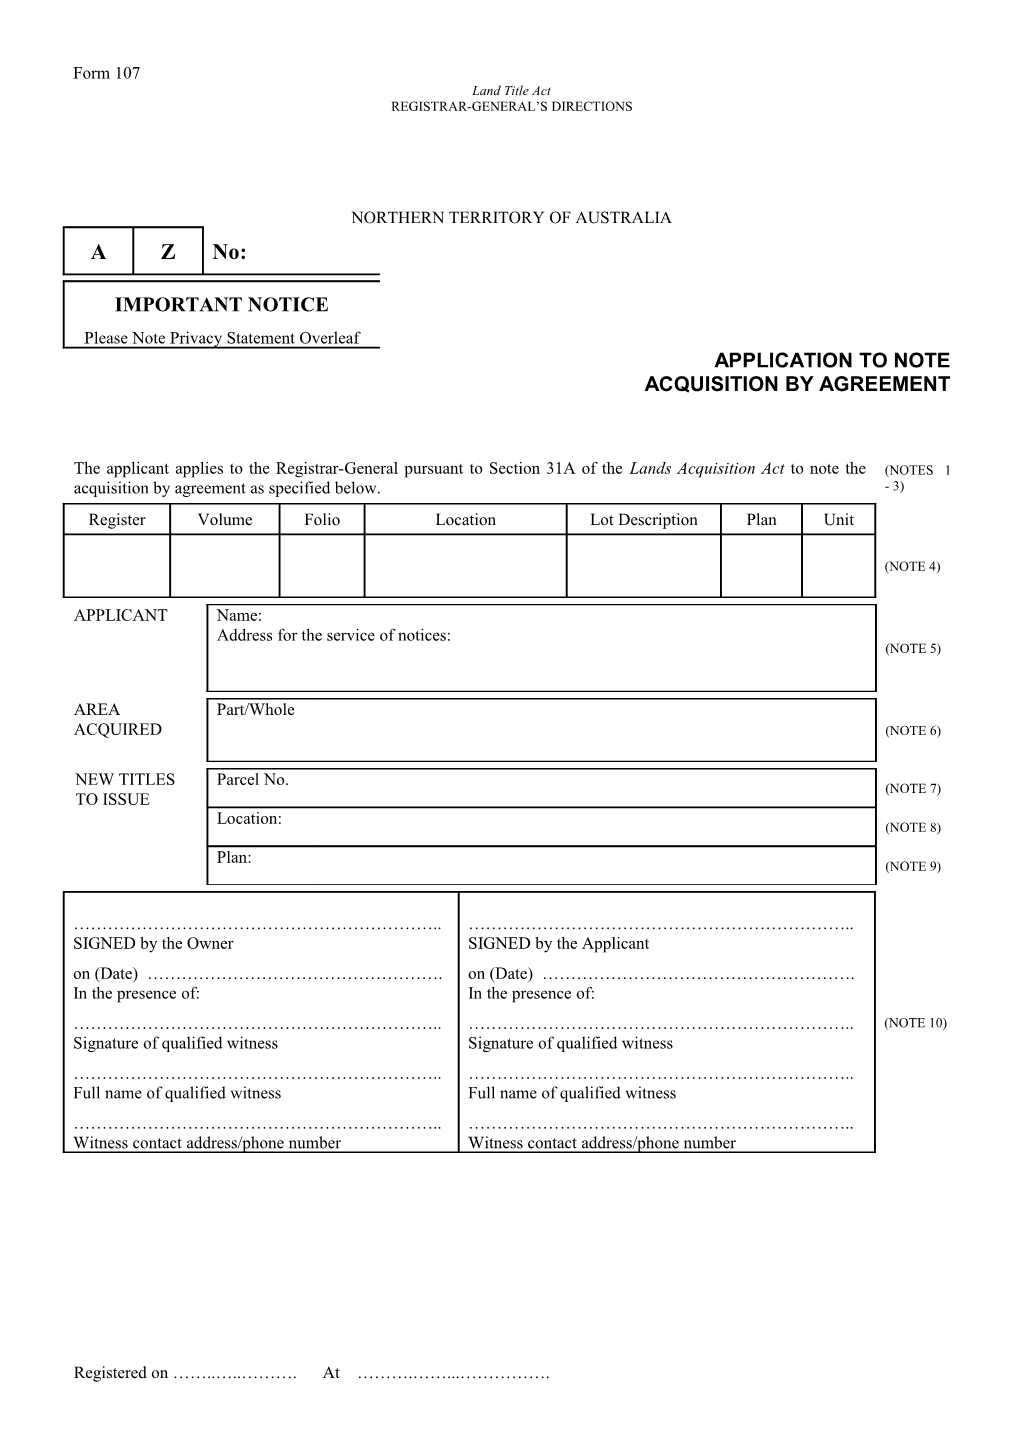 Form No. 107 - Application to Note Acquisition by Agreement